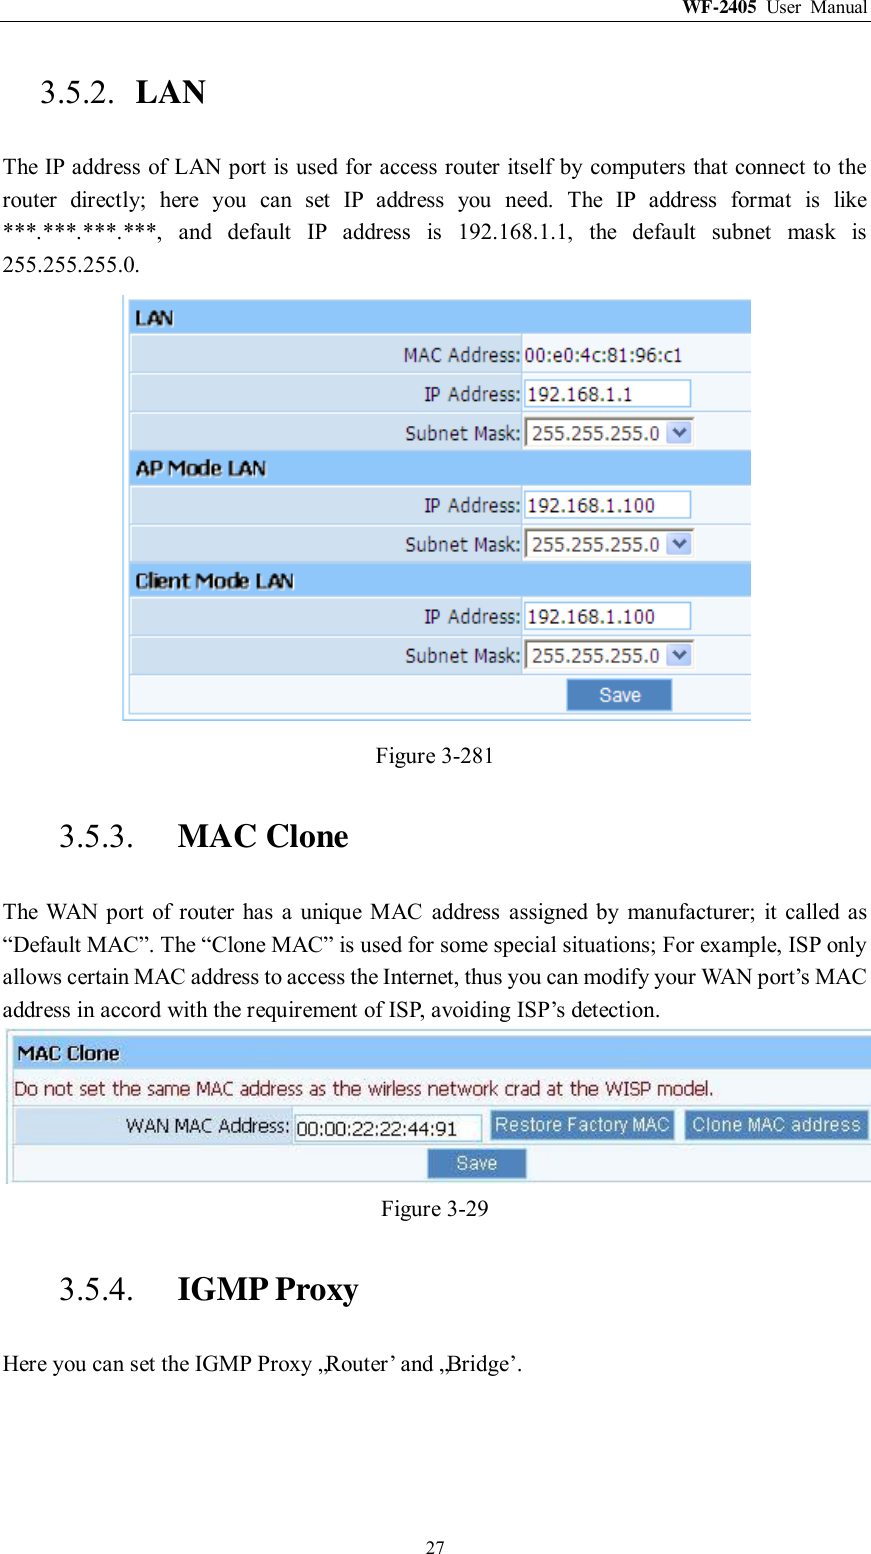 WF-2405  User  Manual  27 3.5.2. LAN The IP address of LAN port is used for access router itself by computers that connect to the router  directly;  here  you  can  set  IP  address  you  need.  The  IP  address  format  is  like ***.***.***.***,  and  default  IP  address  is  192.168.1.1,  the  default  subnet  mask  is 255.255.255.0.  Figure 3-281 3.5.3. MAC Clone The  WAN  port  of router  has  a  unique  MAC  address  assigned  by  manufacturer;  it  called  as “Default MAC”. The “Clone MAC” is used for some special situations; For example, ISP only allows certain MAC address to access the Internet, thus you can modify your WAN port‟s MAC address in accord with the requirement of ISP, avoiding ISP‟s detection.  Figure 3-29 3.5.4. IGMP Proxy Here you can set the IGMP Proxy „Router‟ and „Bridge‟. 